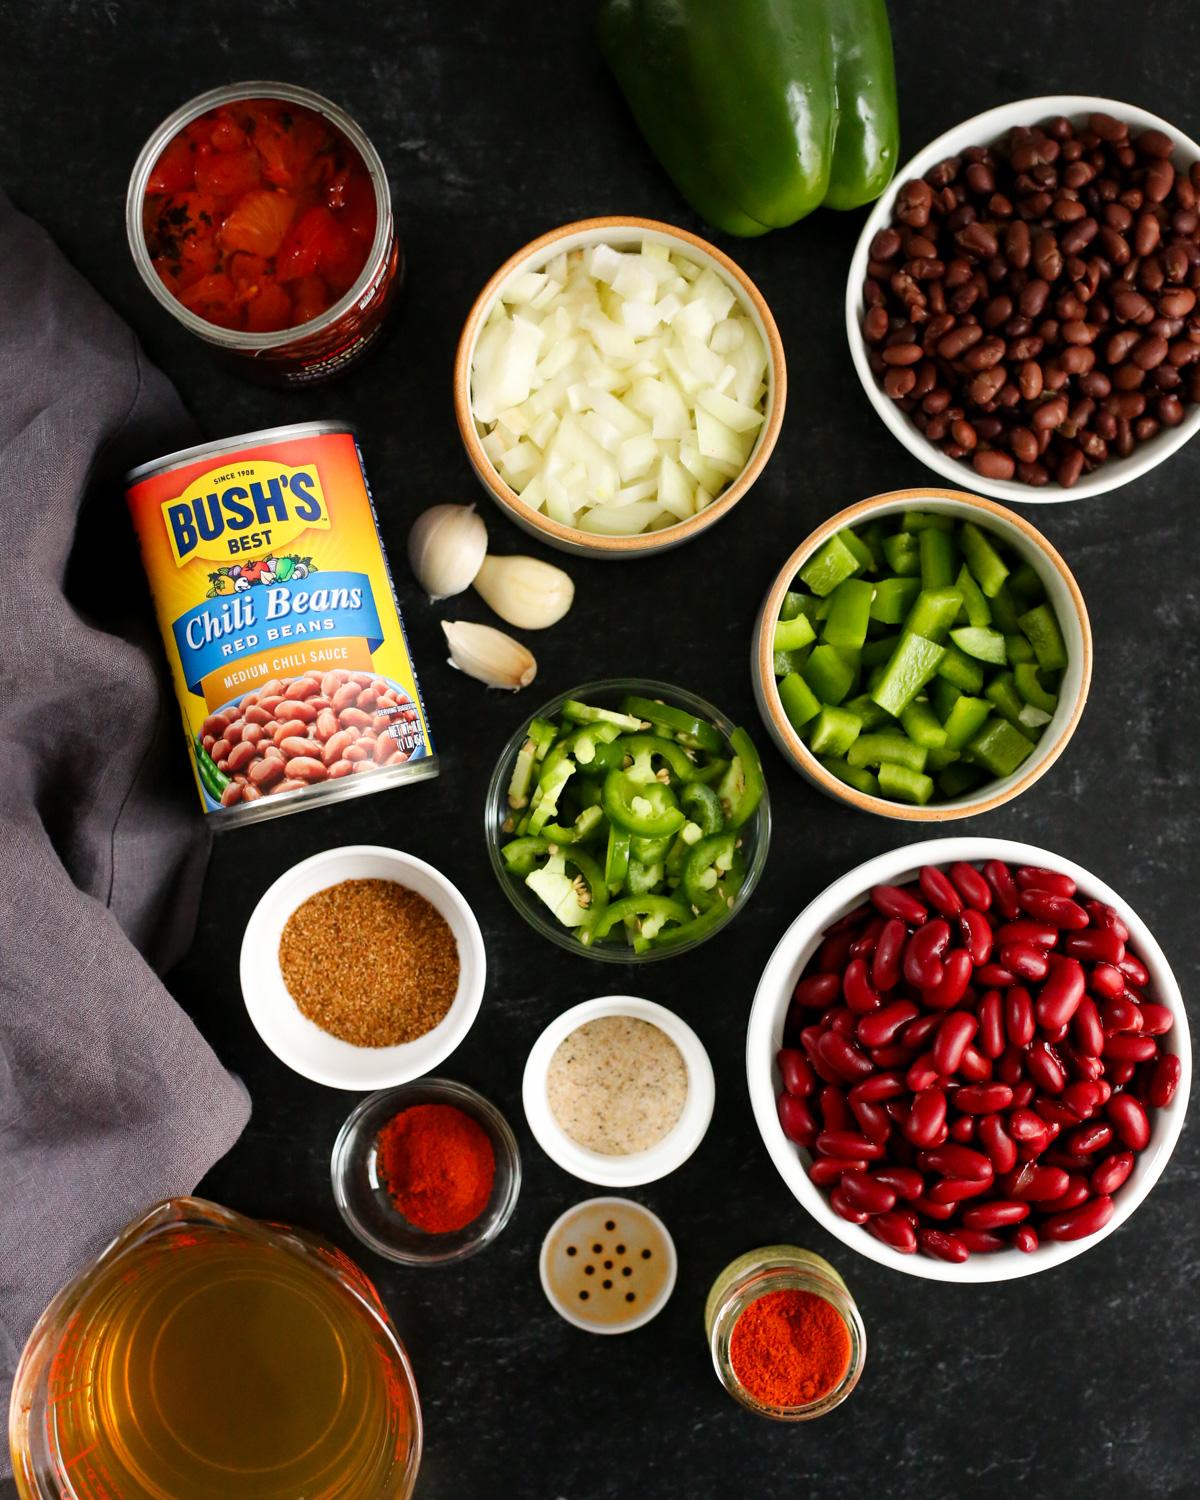 Overhead view of a collection of ingredients to make a chili recipe, including a can of Bush's Best chili beans, drained black beans and kidney beans, chopped onions, green bell peppers, jalapeño peppers, a few garlic cloves, a can of fire roasted tomatoes, and various chili spices and seasonings